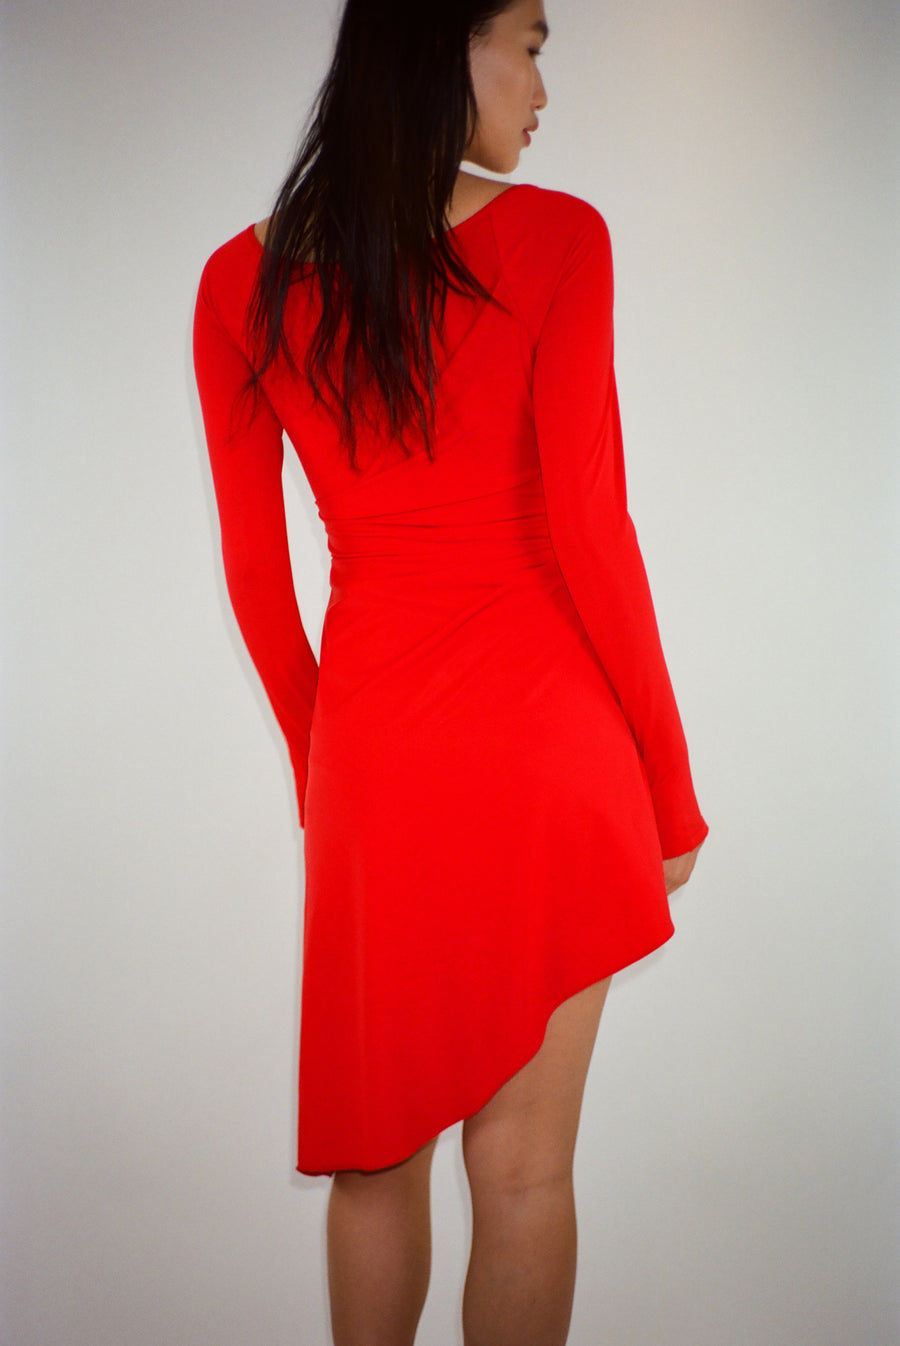 NARCISSA DRESS IN RED